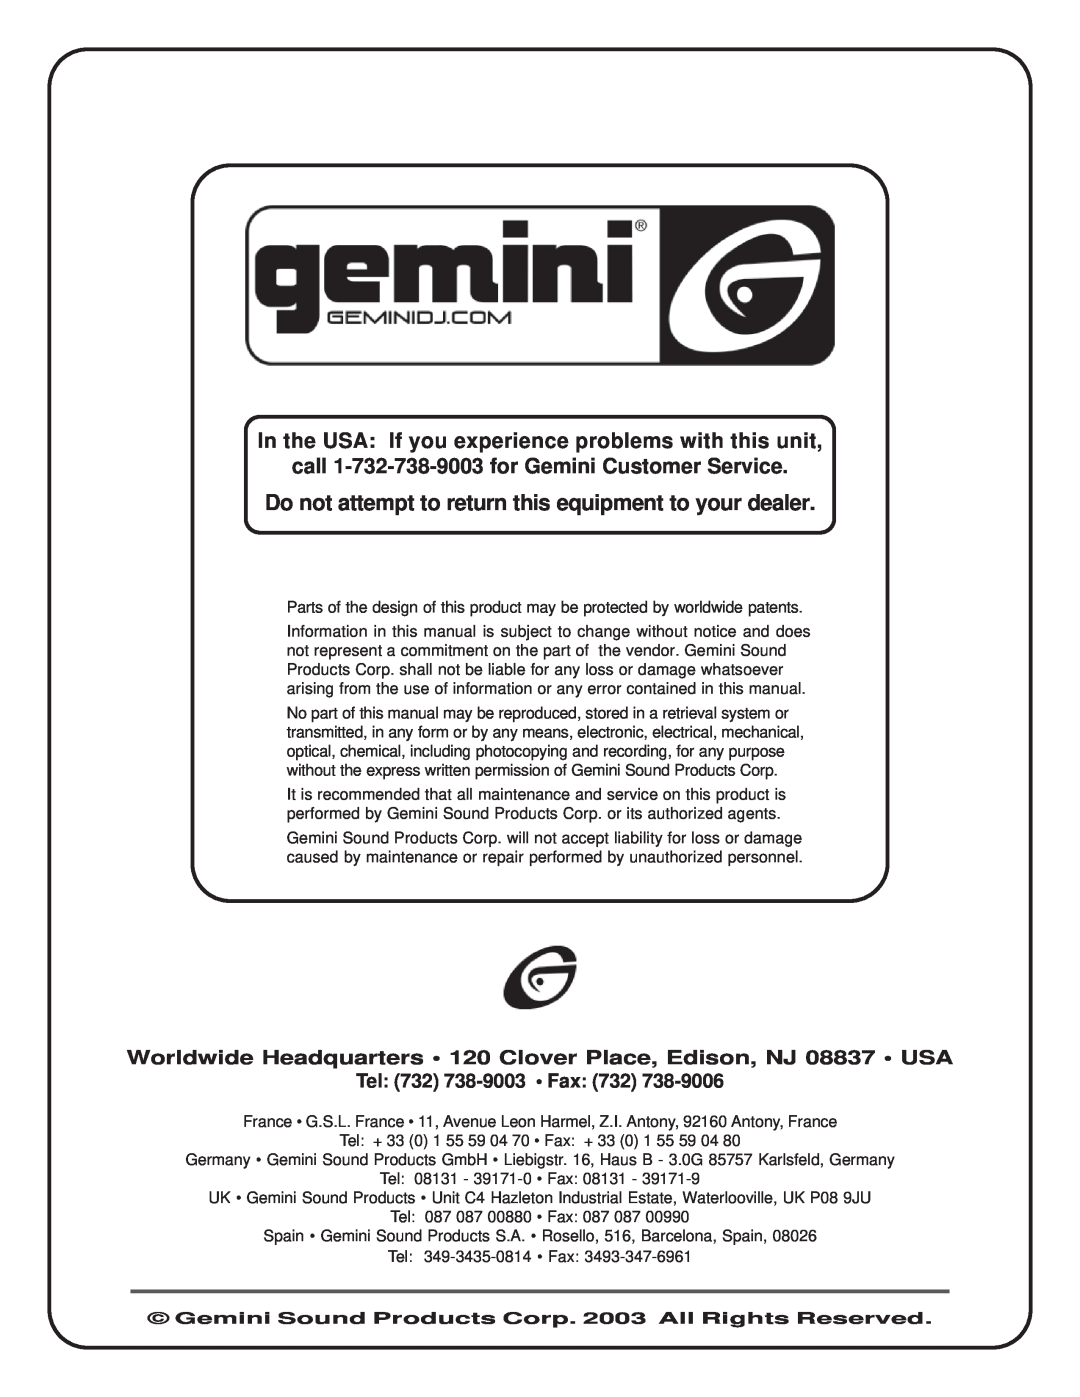 Gemini UX-1610 Do not attempt to return this equipment to your dealer, call 1-732-738-9003 for Gemini Customer Service 